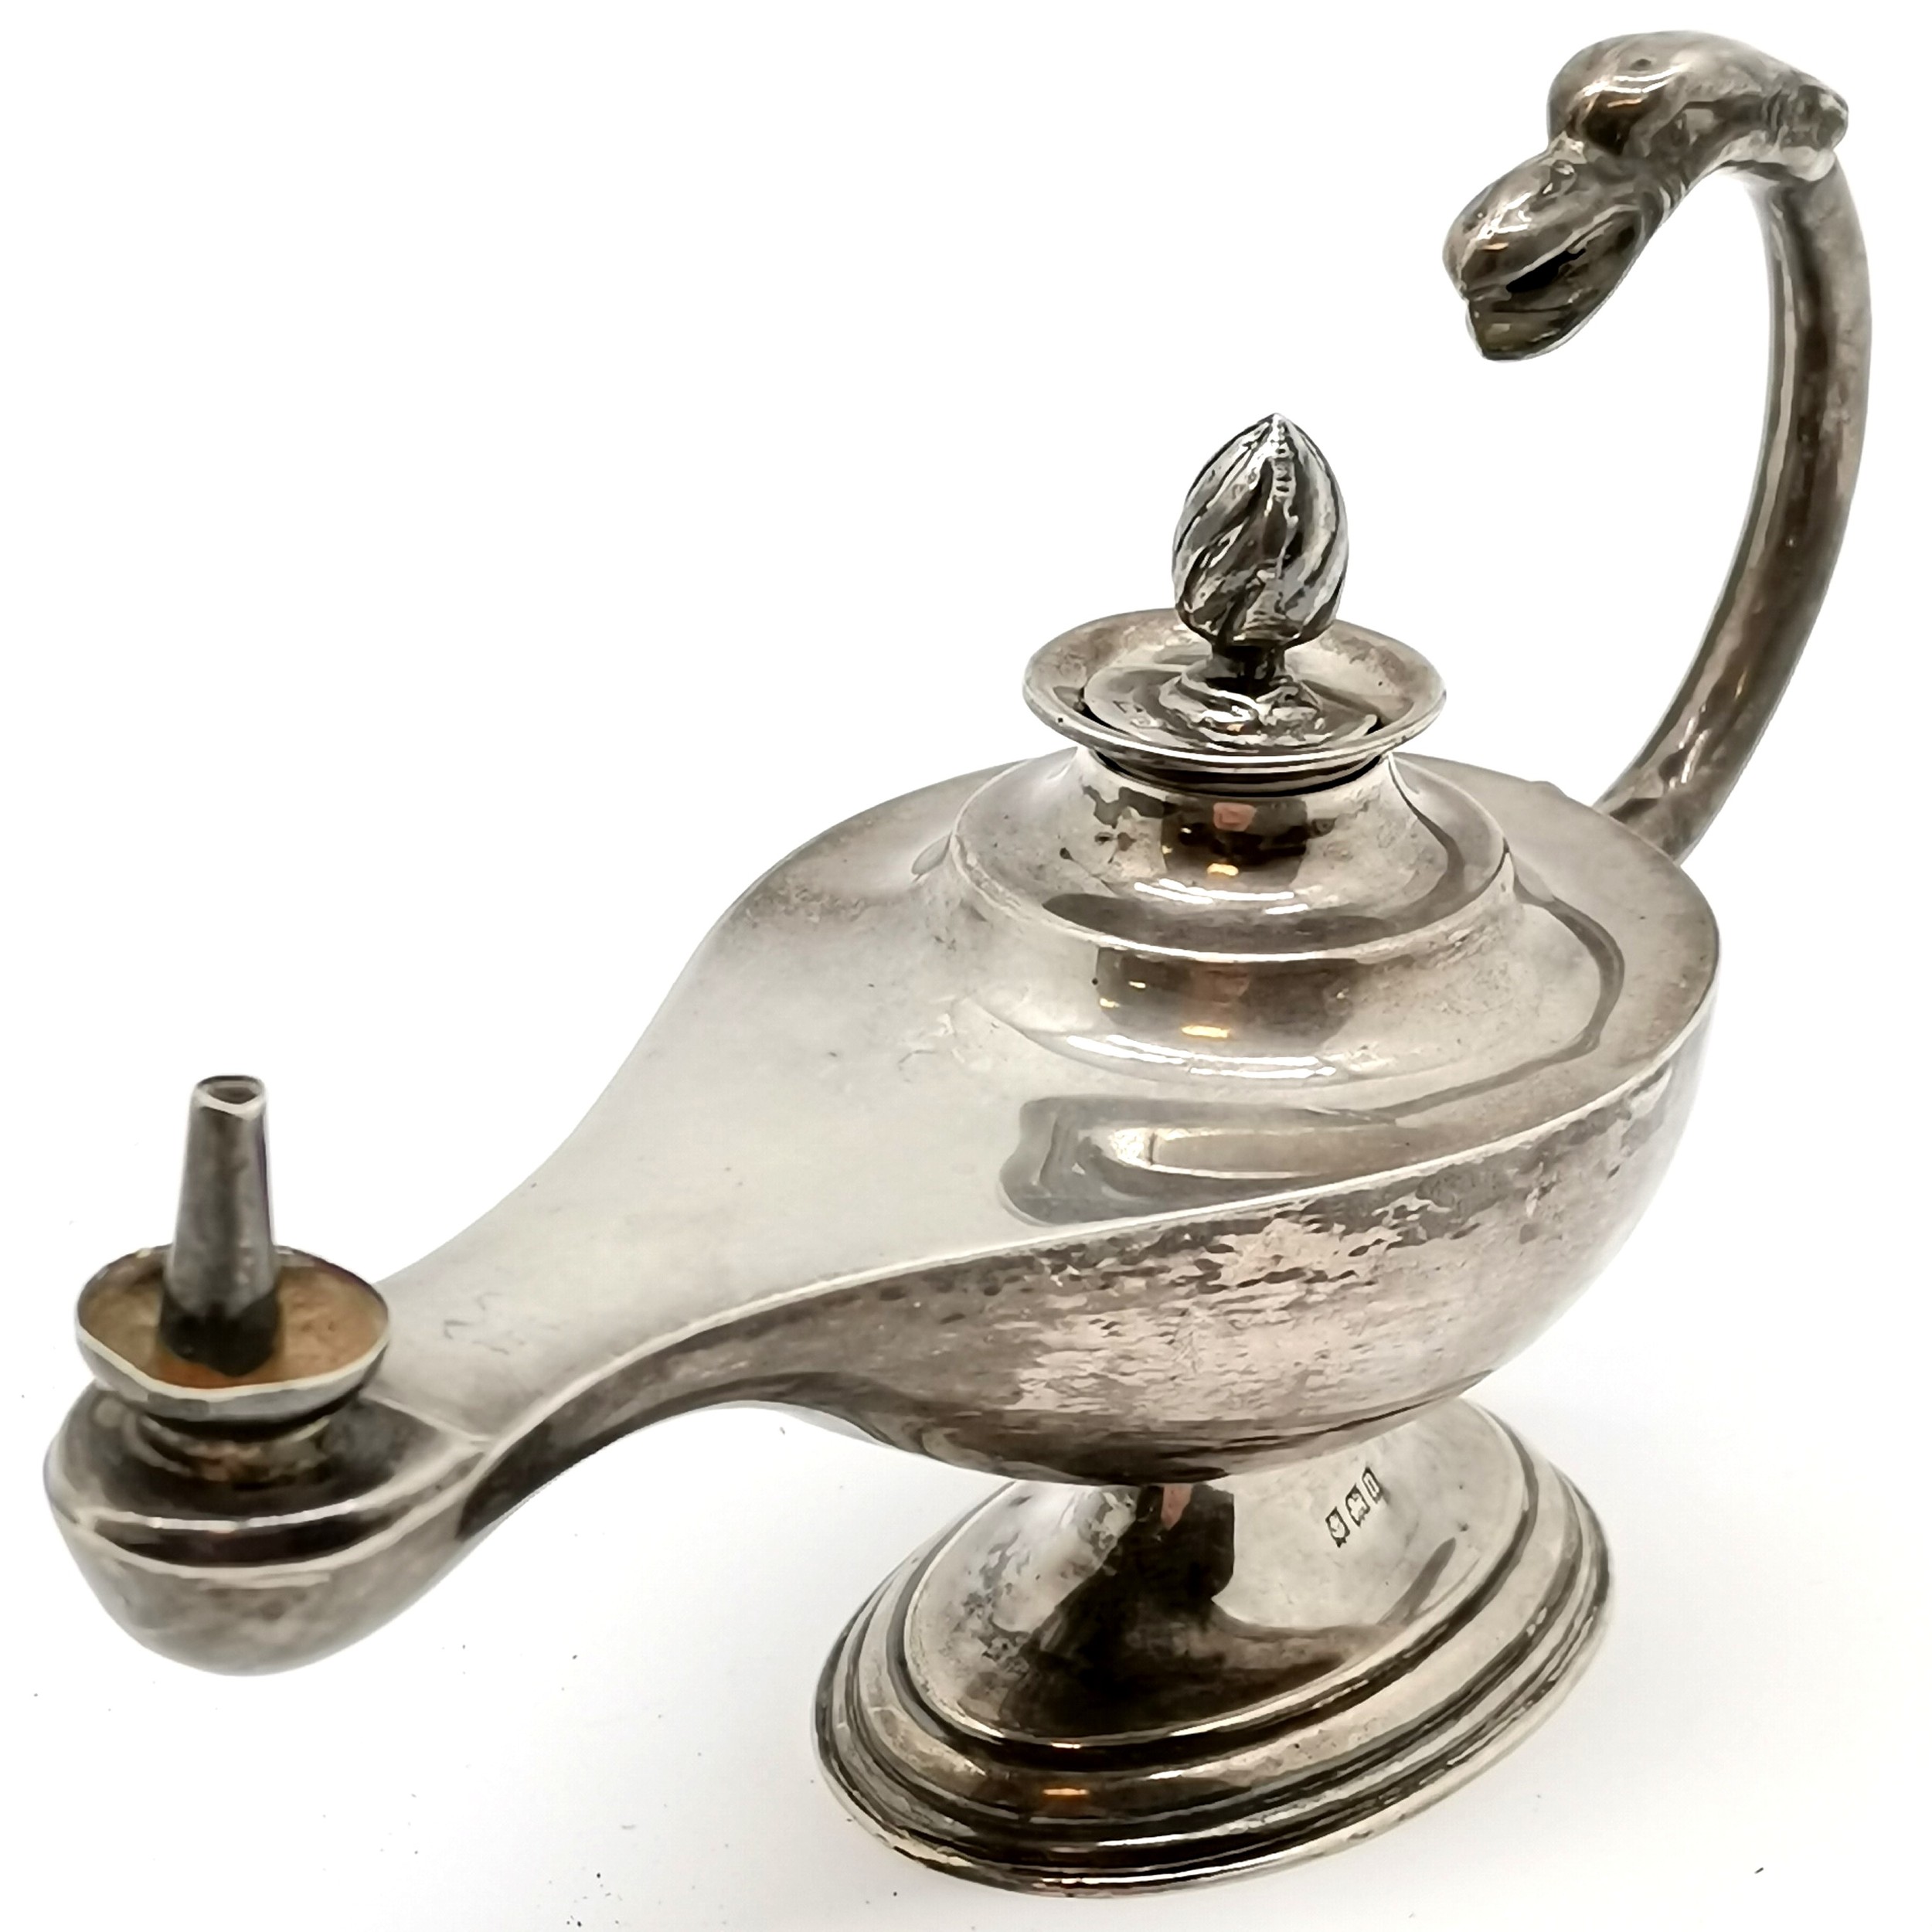 1912 silver genie lamp design table lighter with later silver stopper - 9cm high x 14.5cm long & 79g - Image 3 of 5